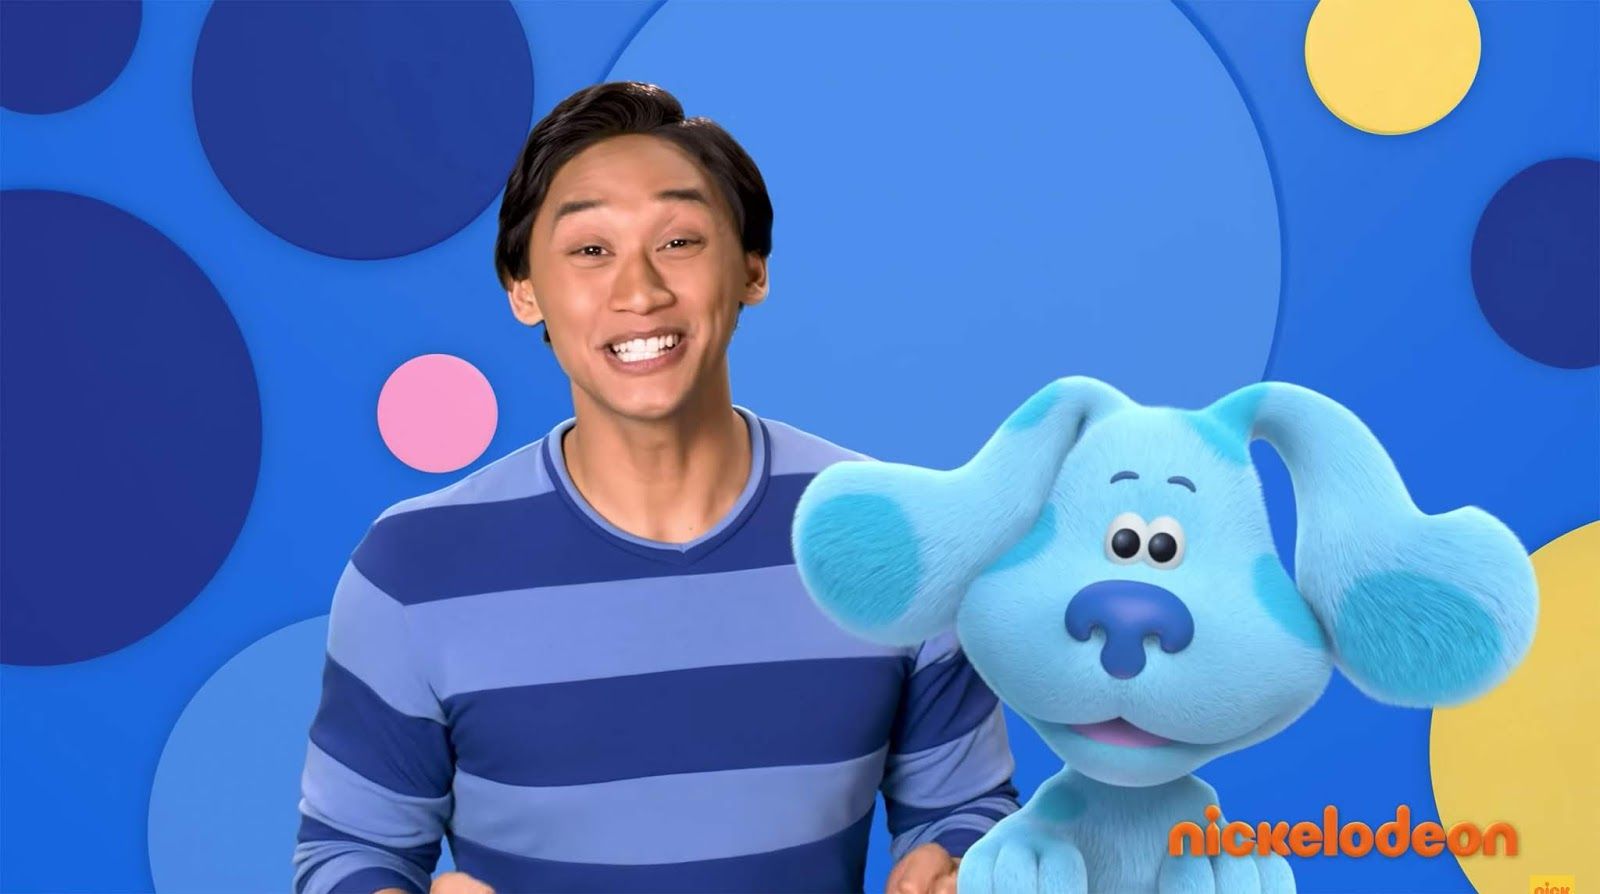 NickALive!: The Internet Thinks the New Host of 'Blue's Clues', Joshua Dela Cruz, Is Really Hot